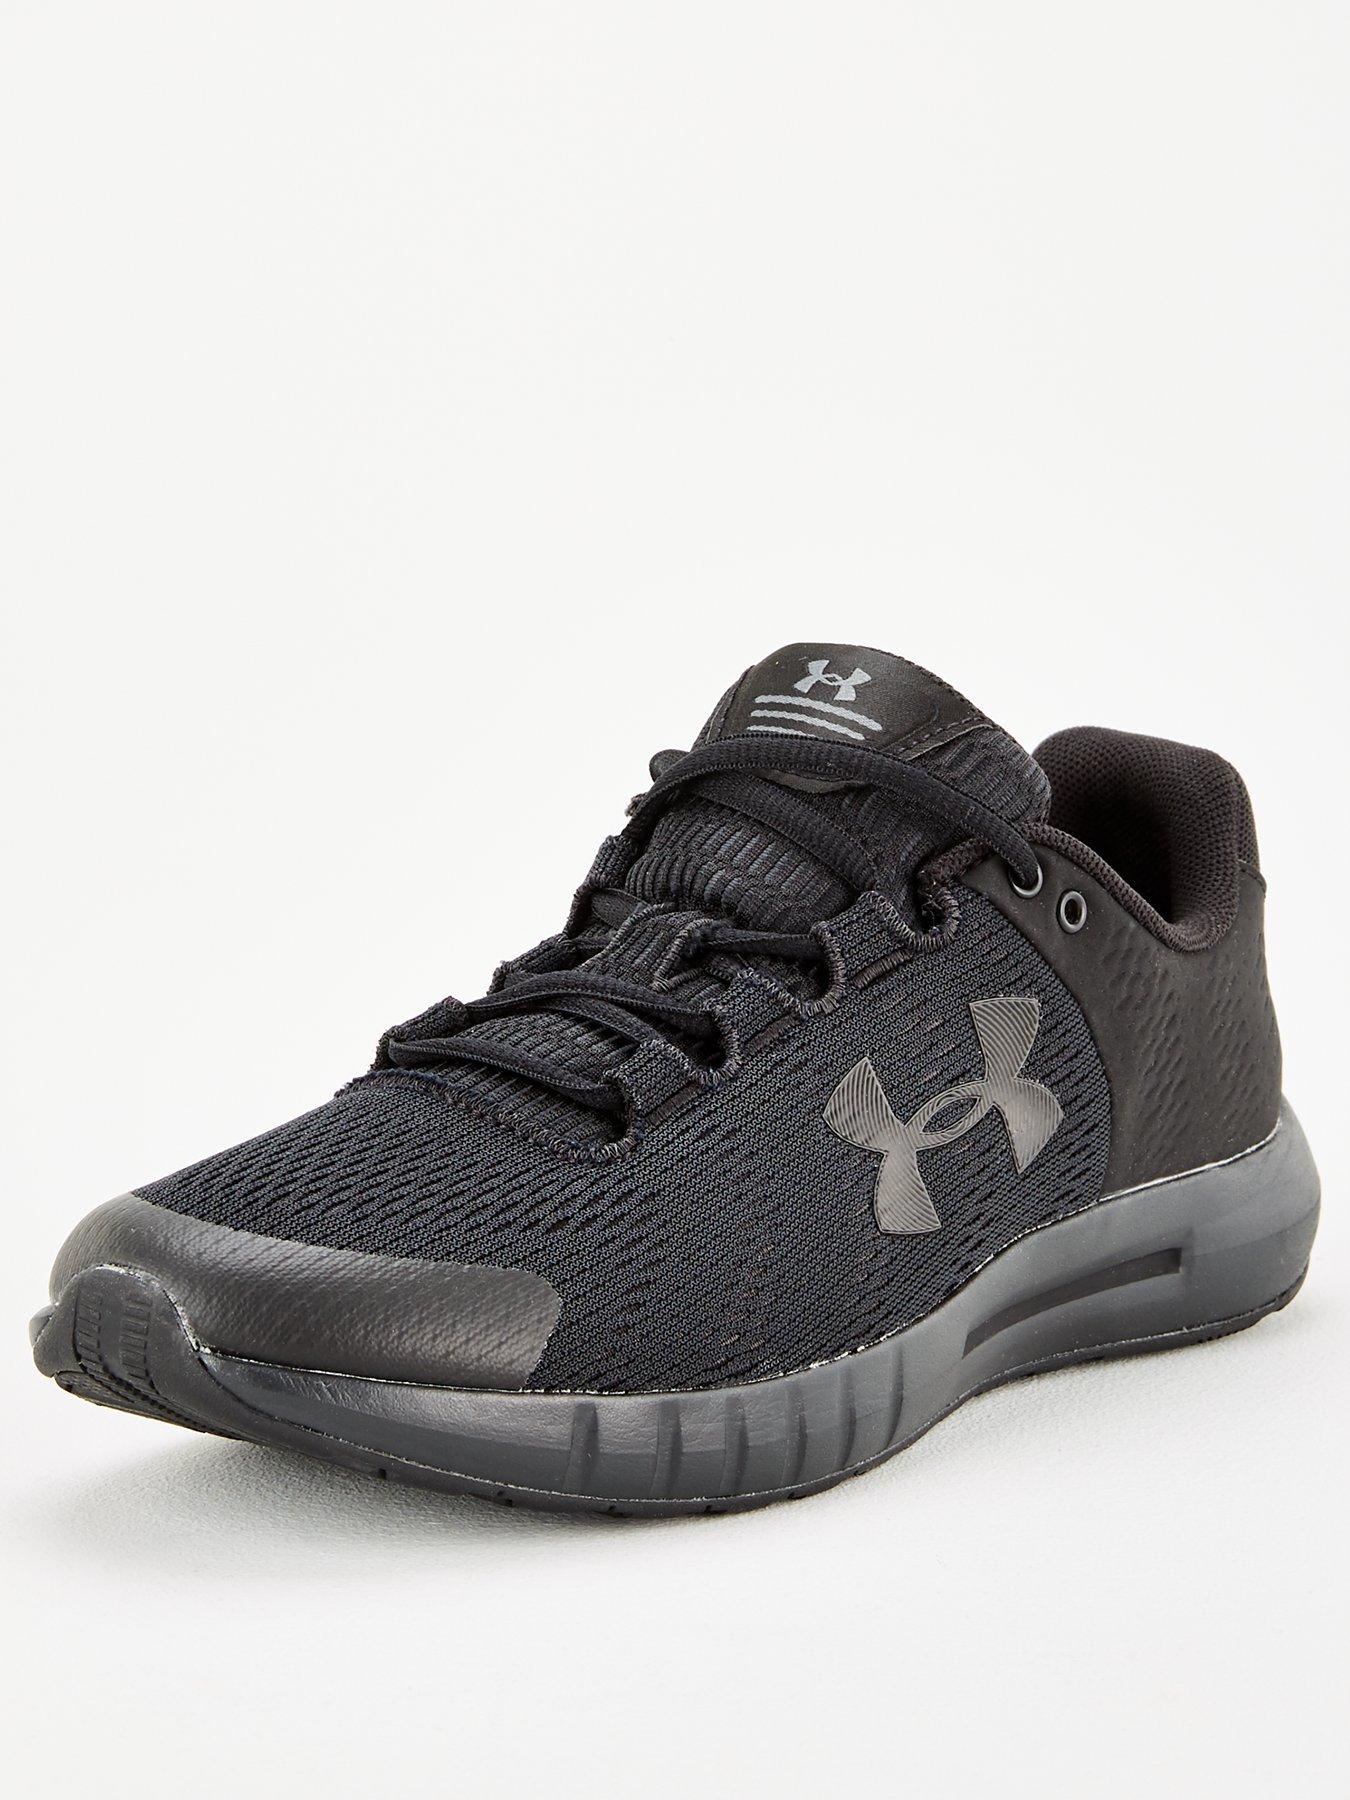 Under armour | Womens trainers | Womens 